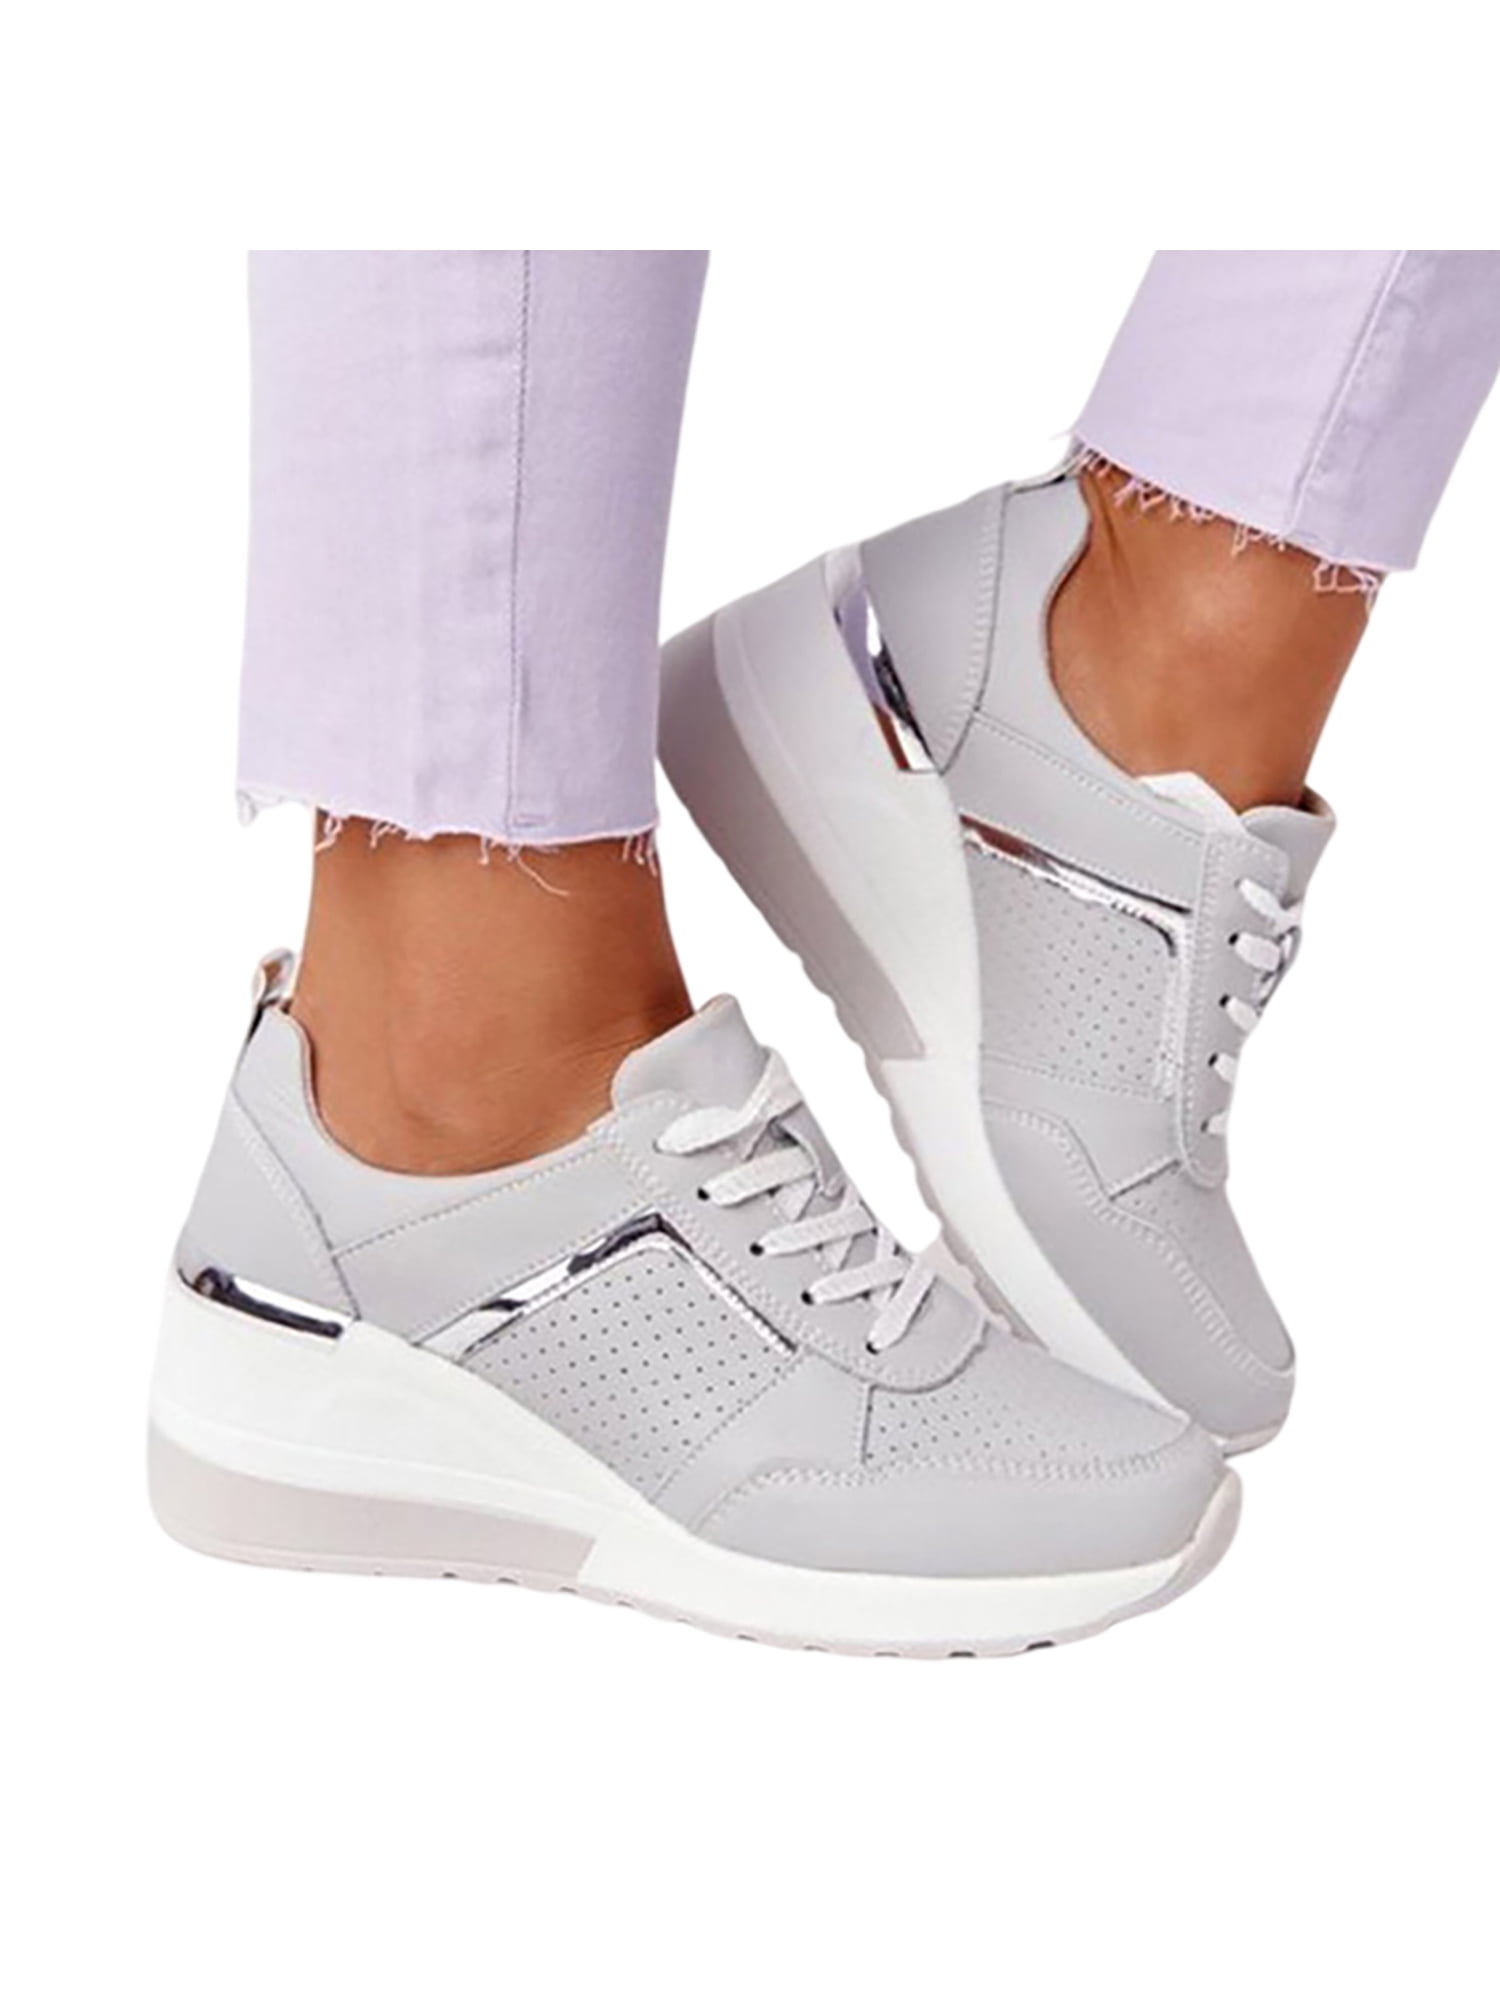 Womens Casual Sneakers Soft Flat Bottom Slip On Double Zipper Trainers Comfortable Sports Shoes 5.5-8.5 